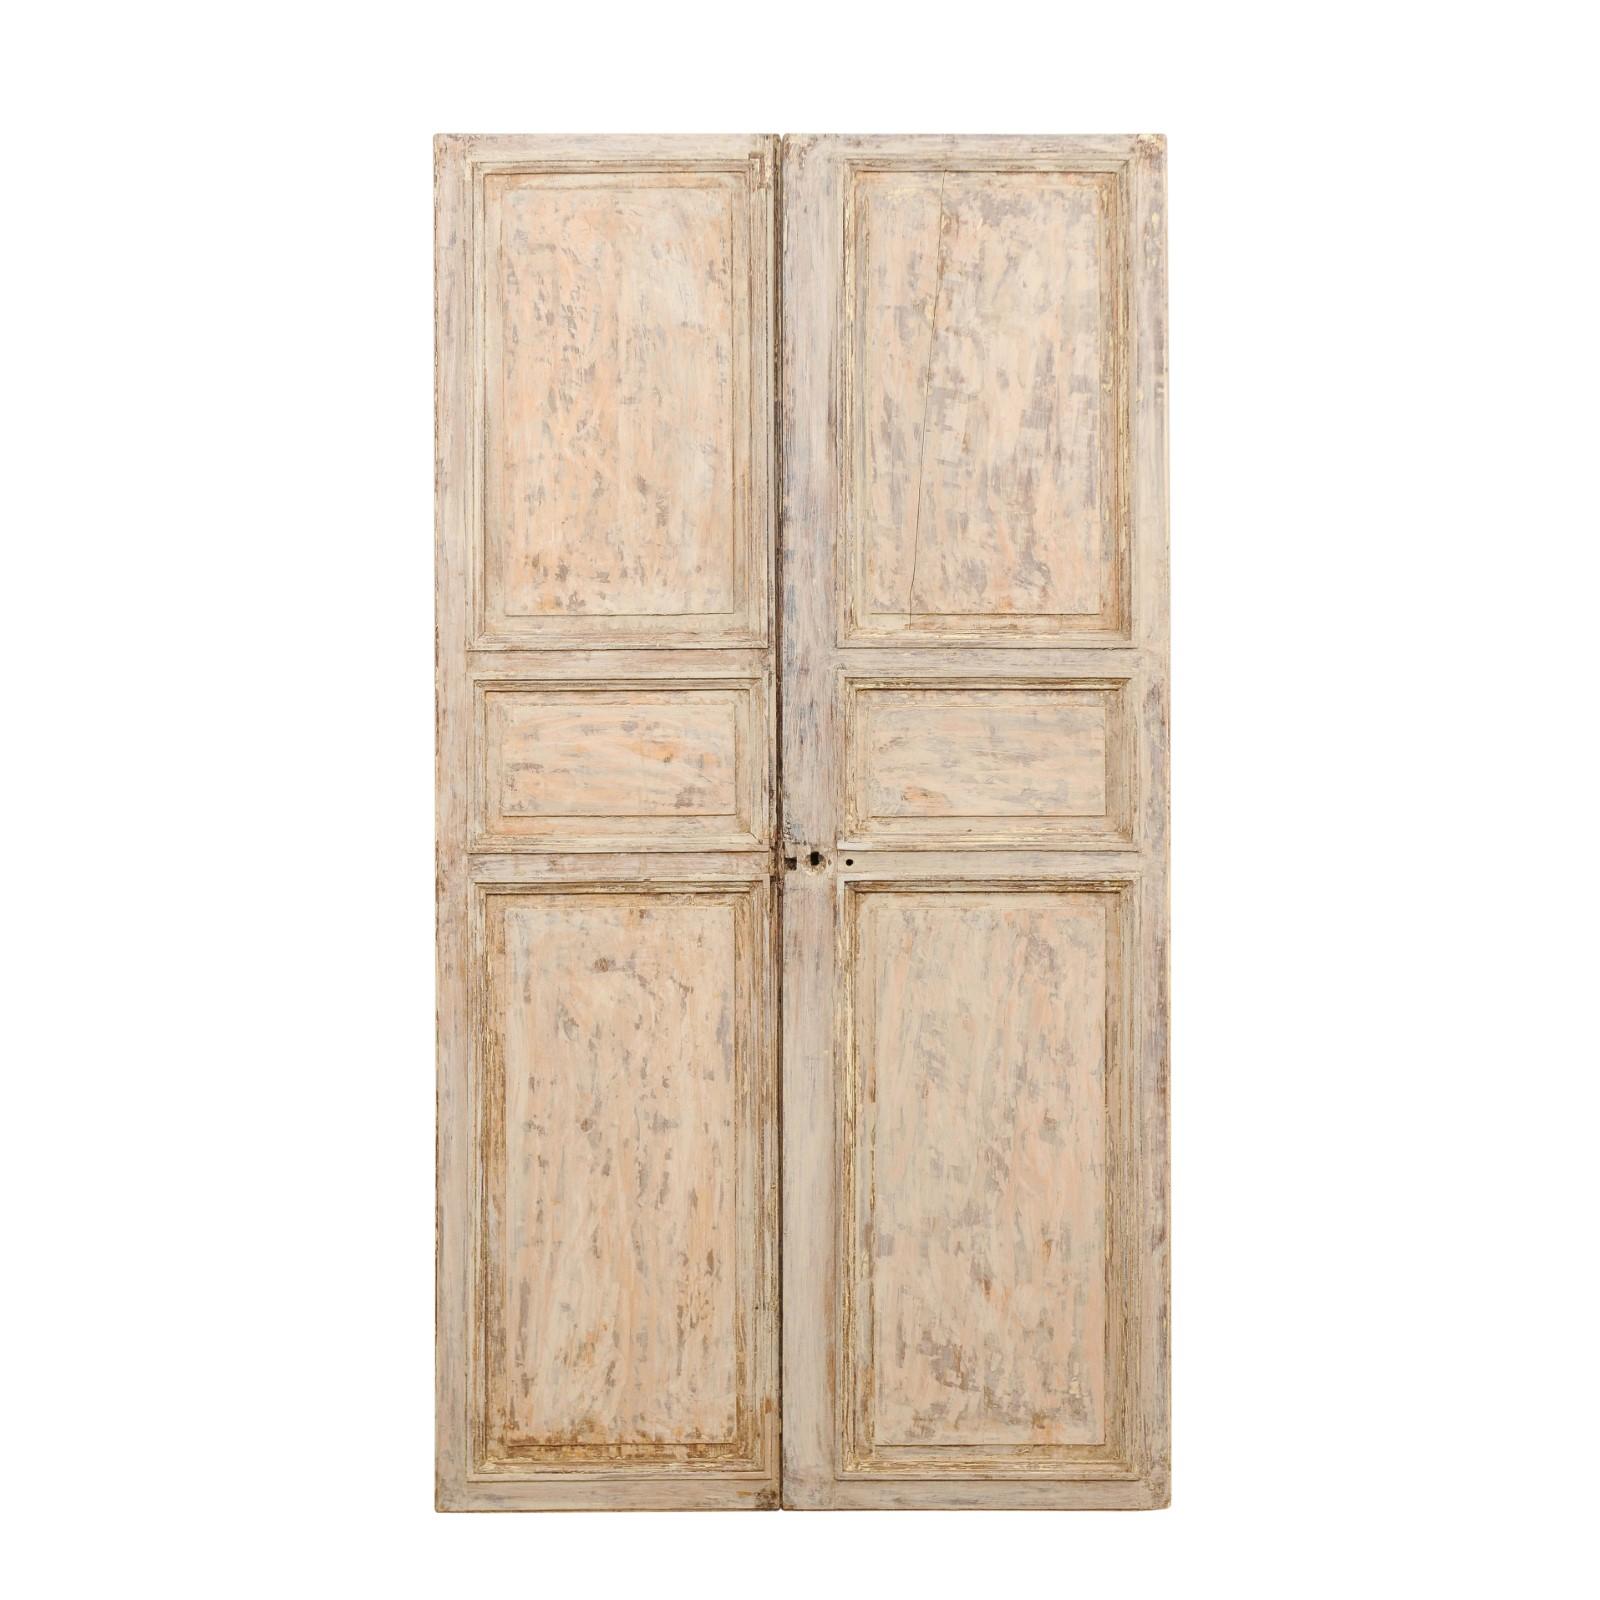 Pair of 19th Century French Painted Wood Doors with Lovely Cream Colored Finish